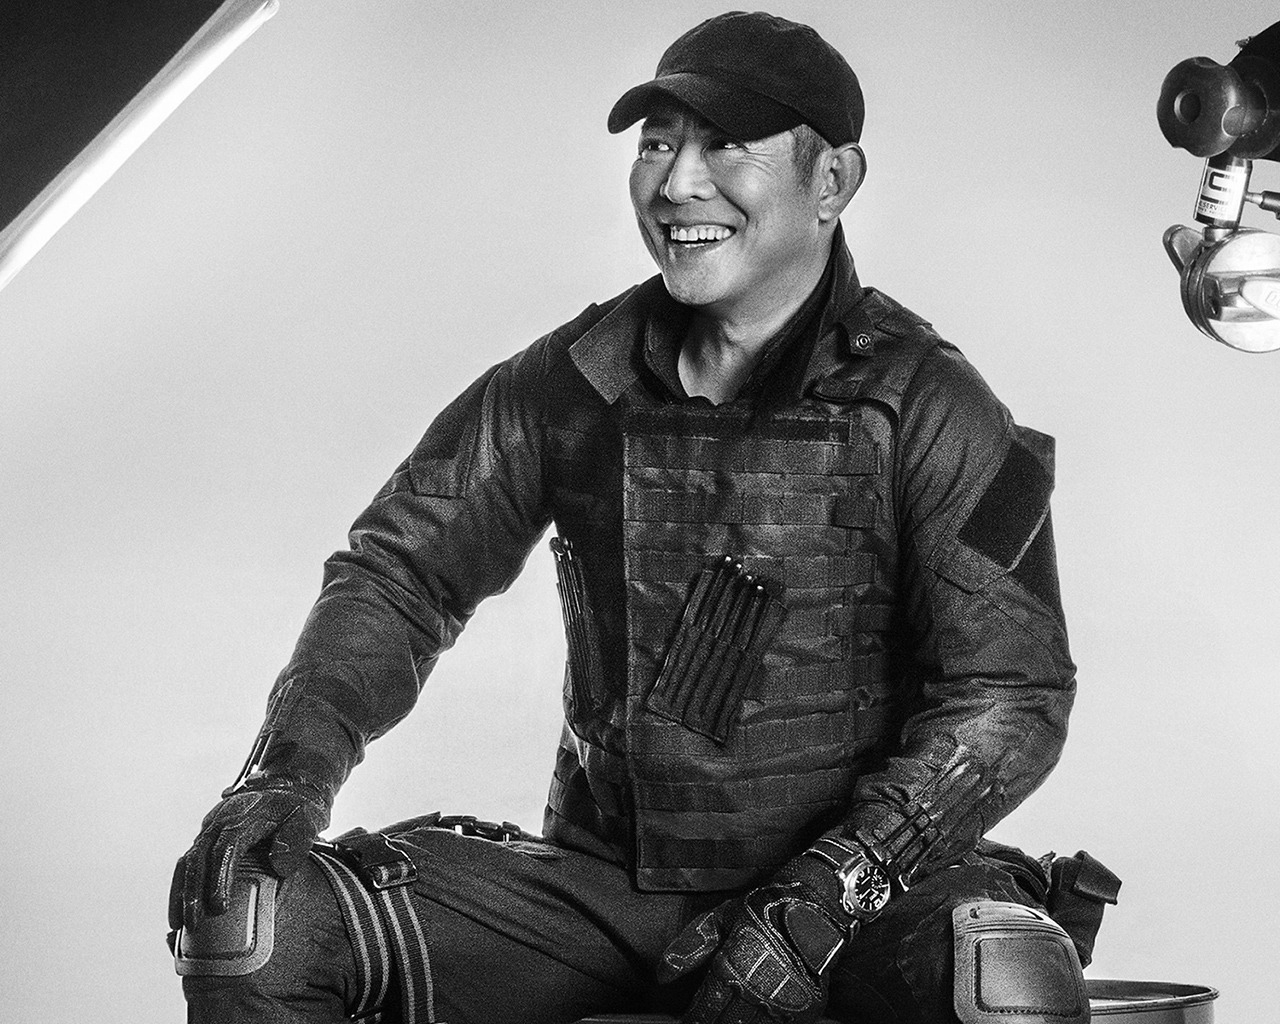 Jet Li The Expendables 3 for 1280 x 1024 resolution